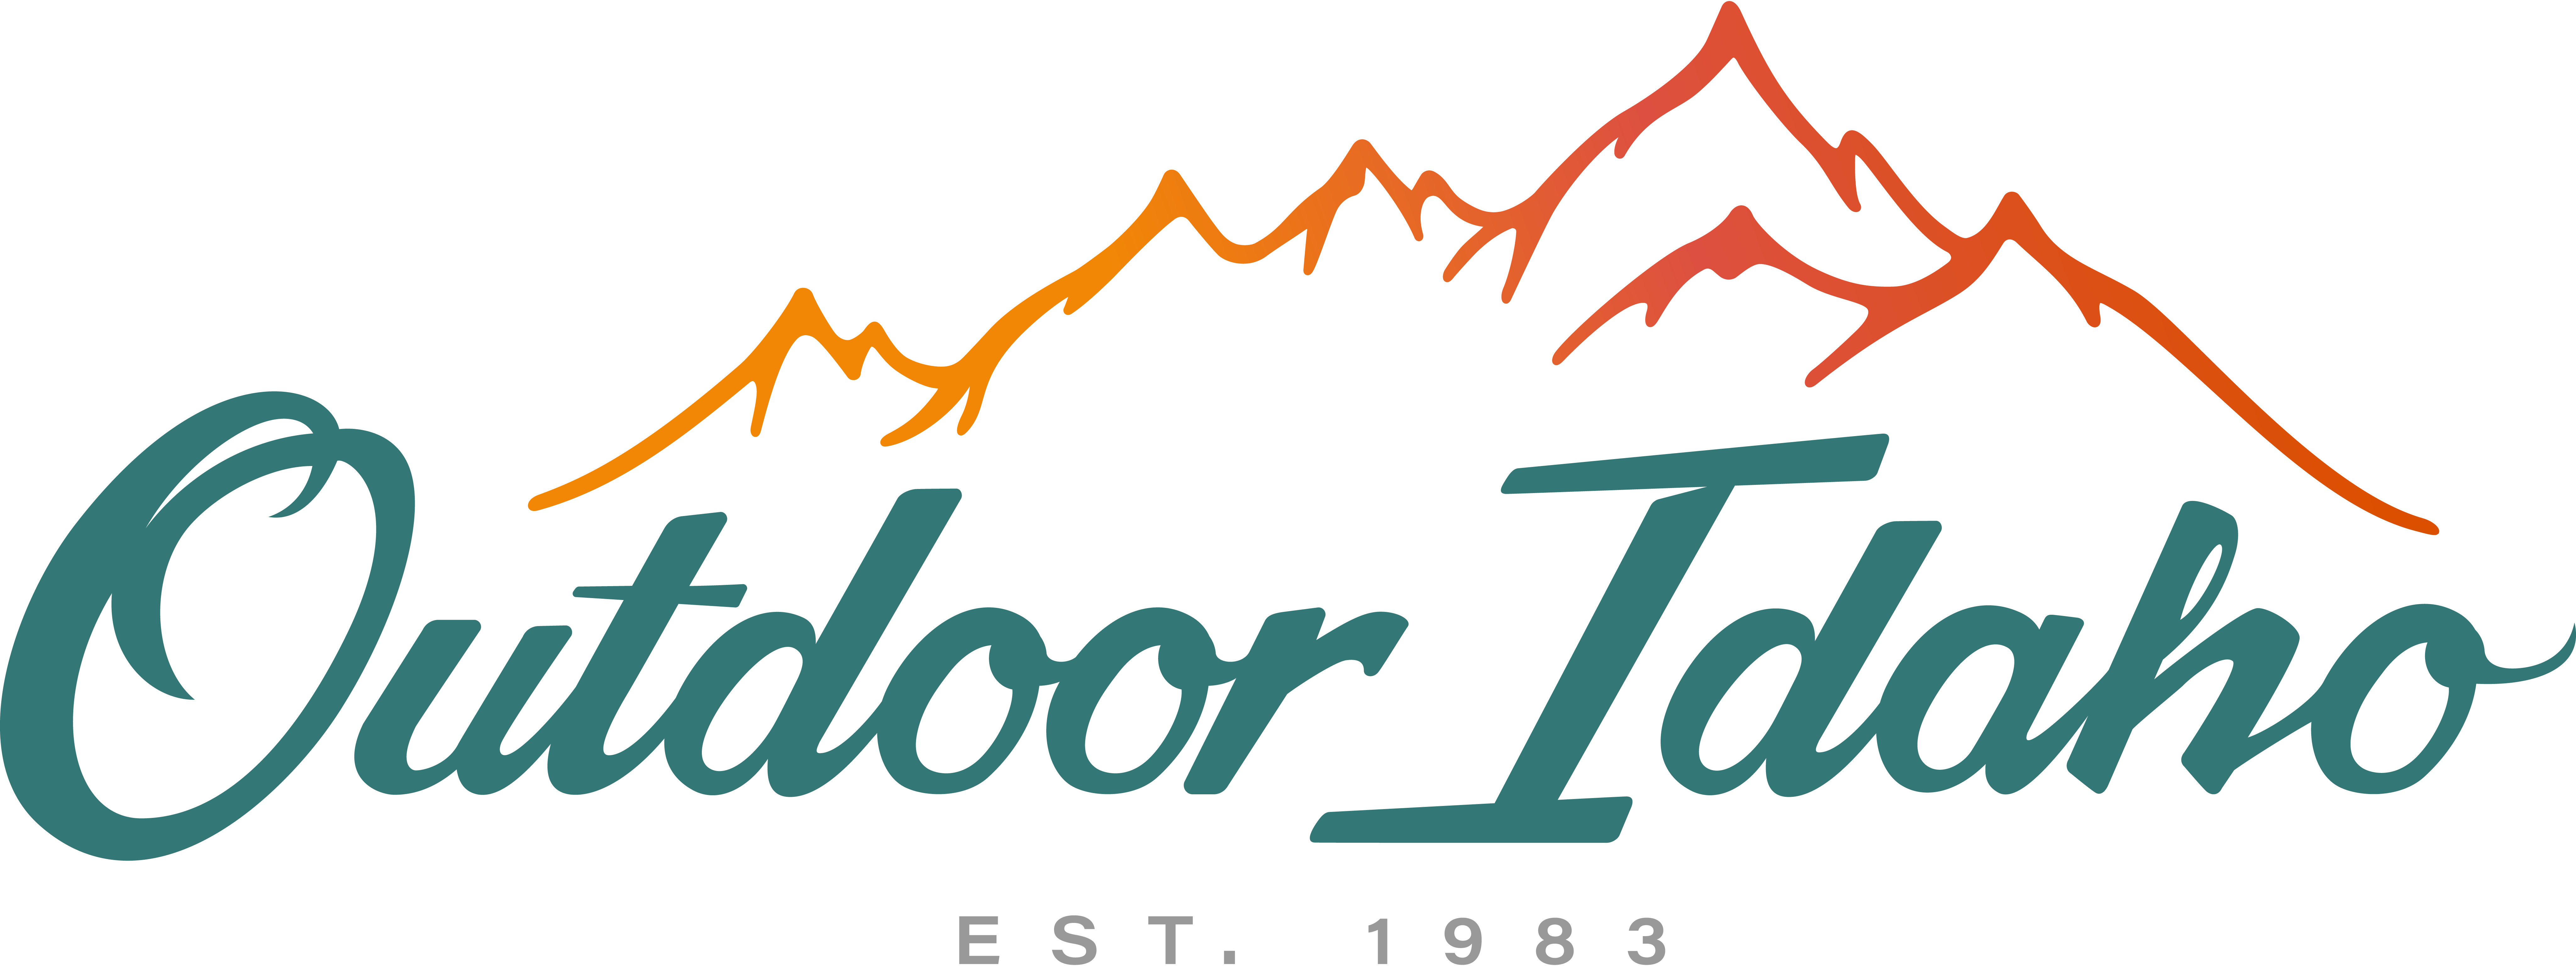 Outdoor Idaho logo with mountain range image over letters